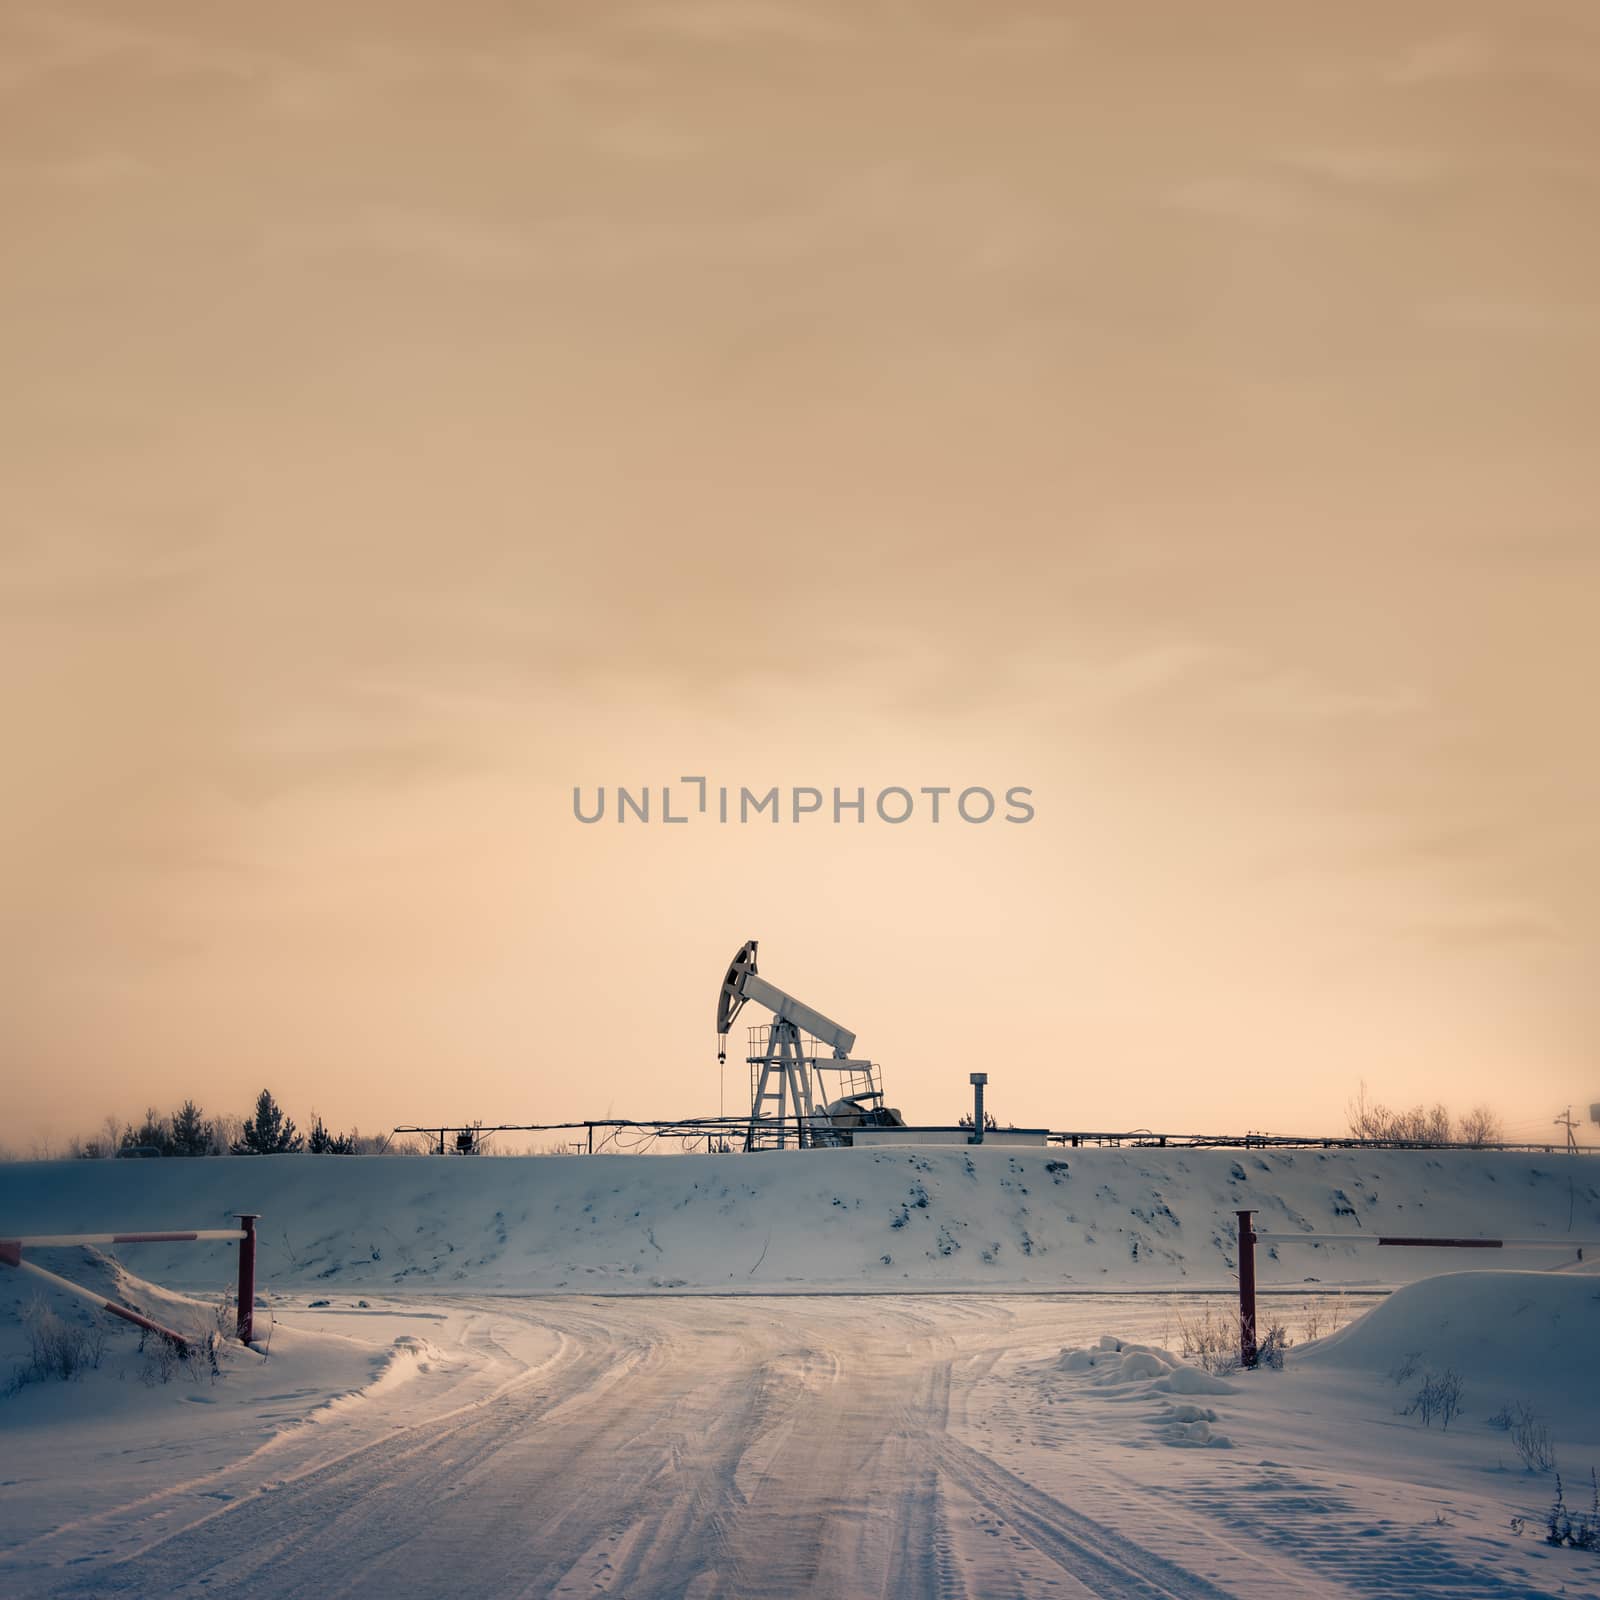 Pump jack on a sky background. Toned. Square format.